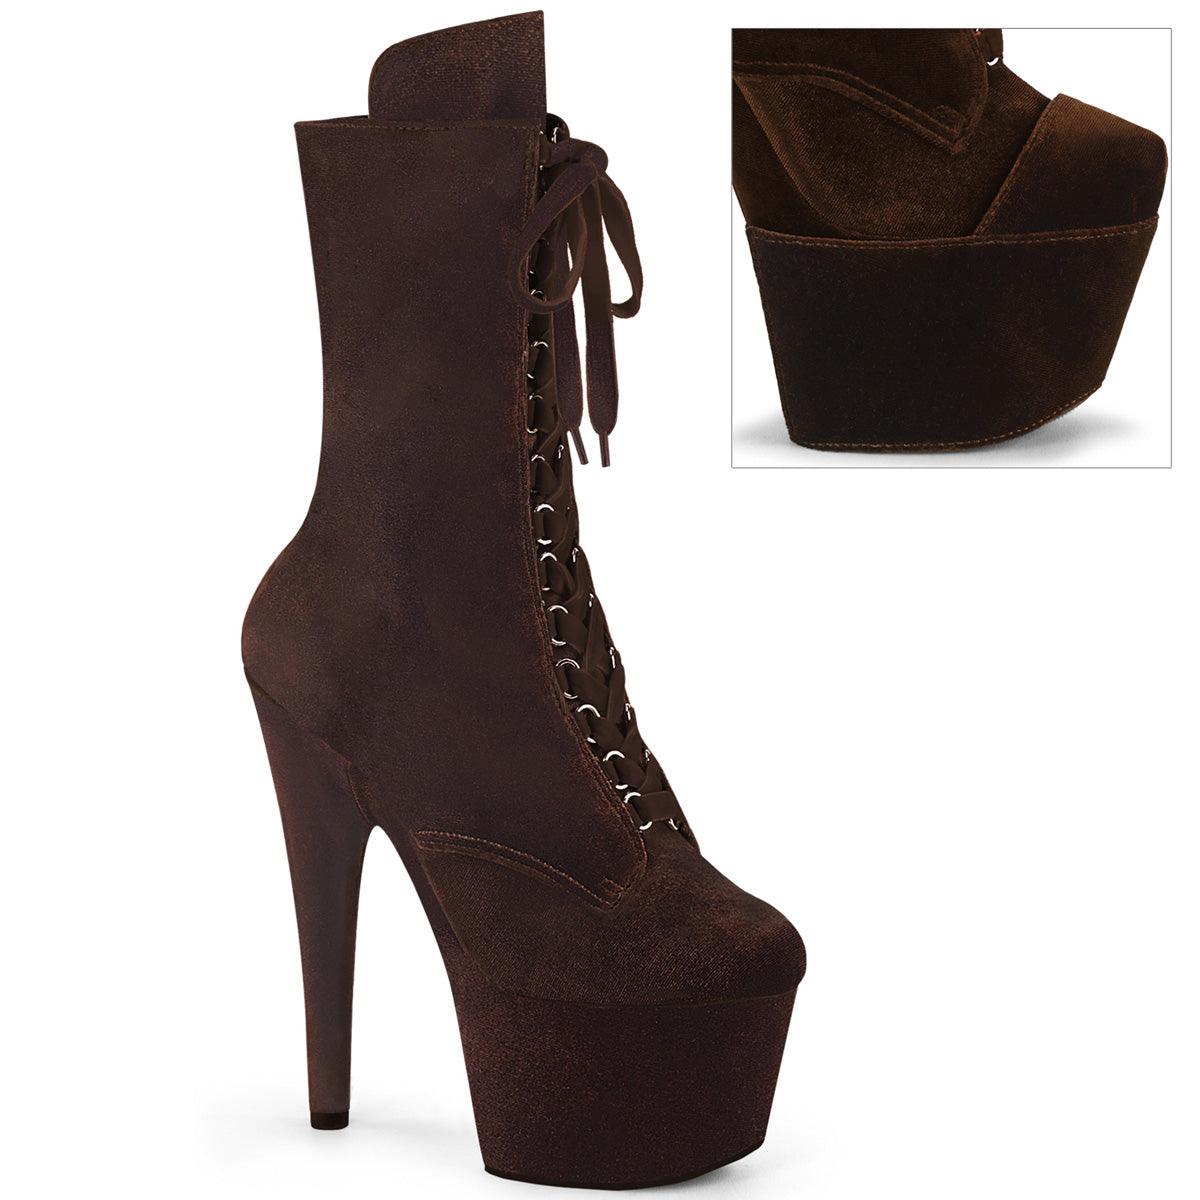 ADORE-1045VEL Sexy Platform Ankle Booties - AMIClubwear